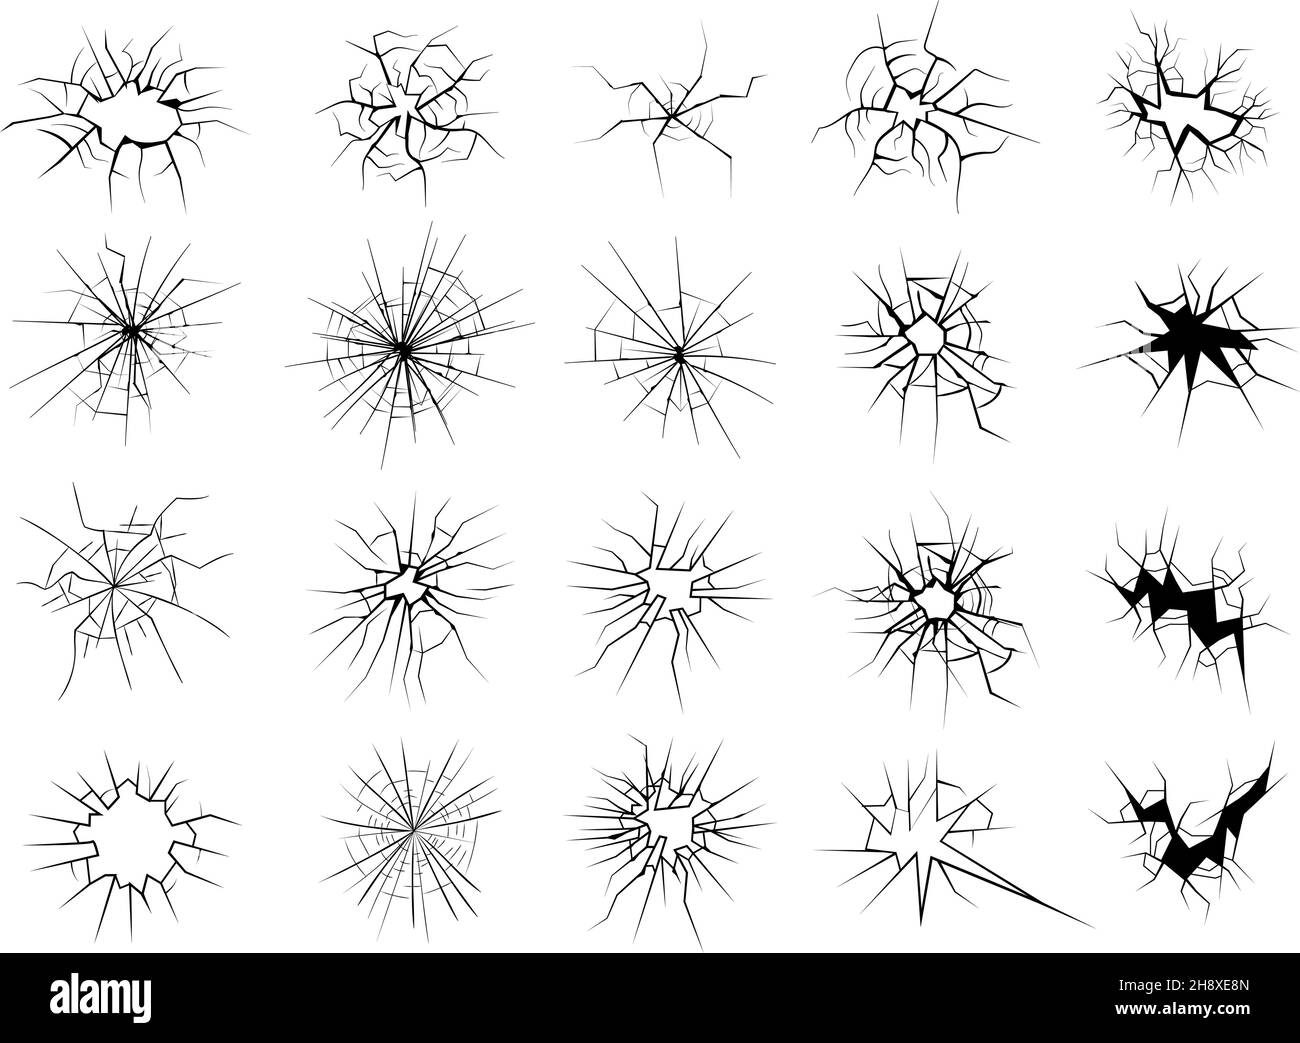 Cracked surfaces. Glass dangerous smashing edges damaged templates recent vector illustrations set isolated Stock Vector